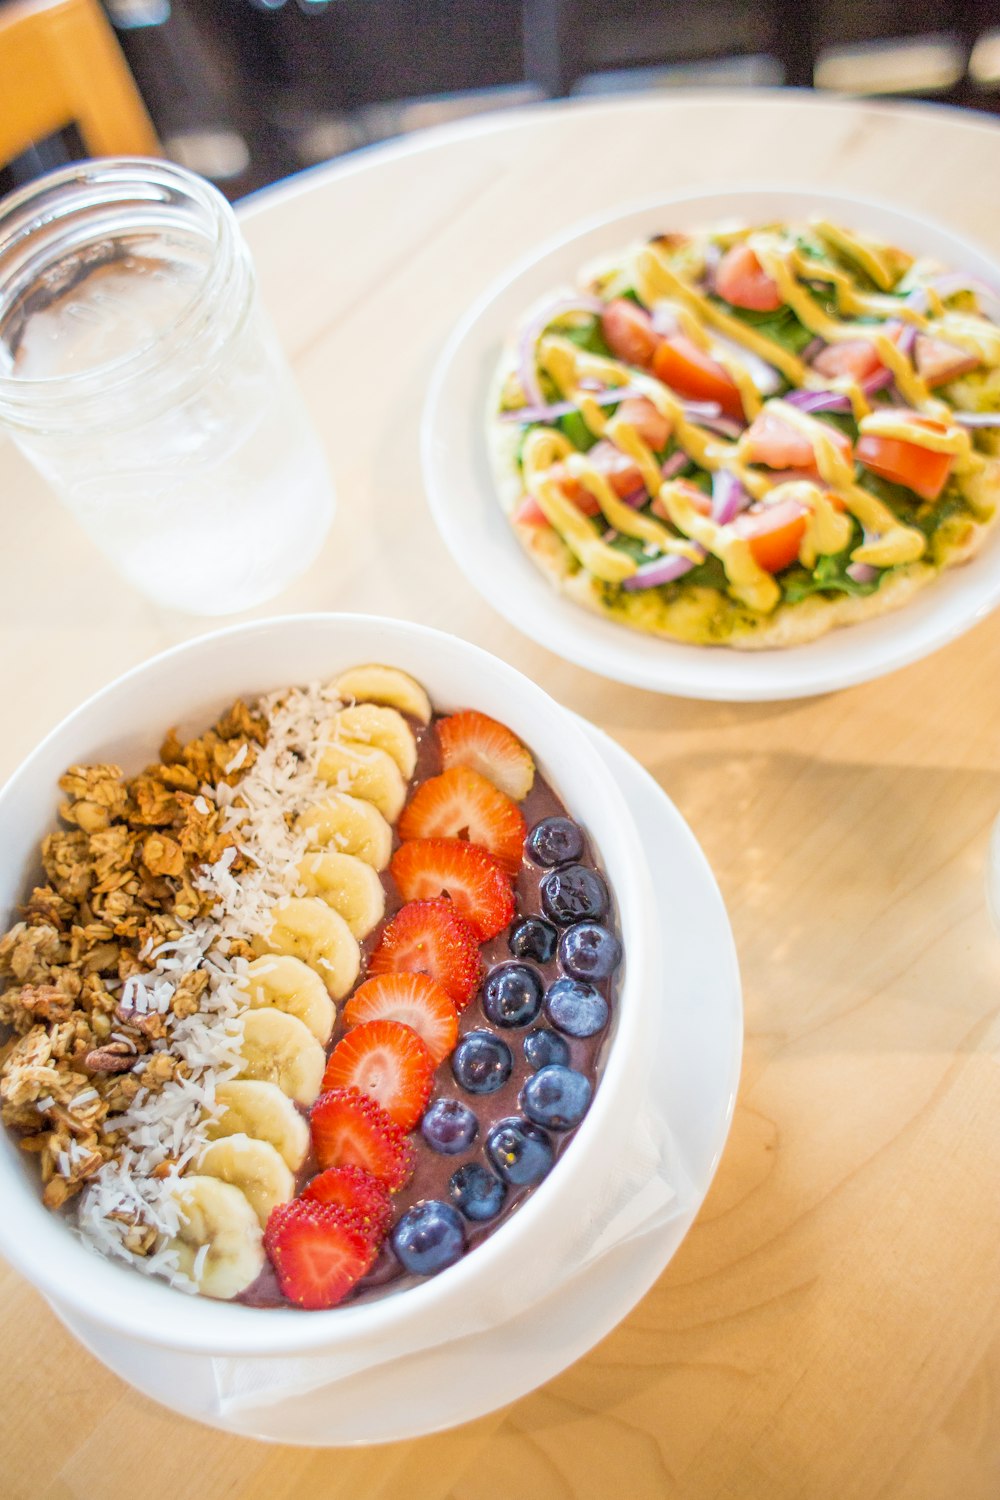 slice banana, strawberry and blueberries on white bowl beside vegetable salad on table